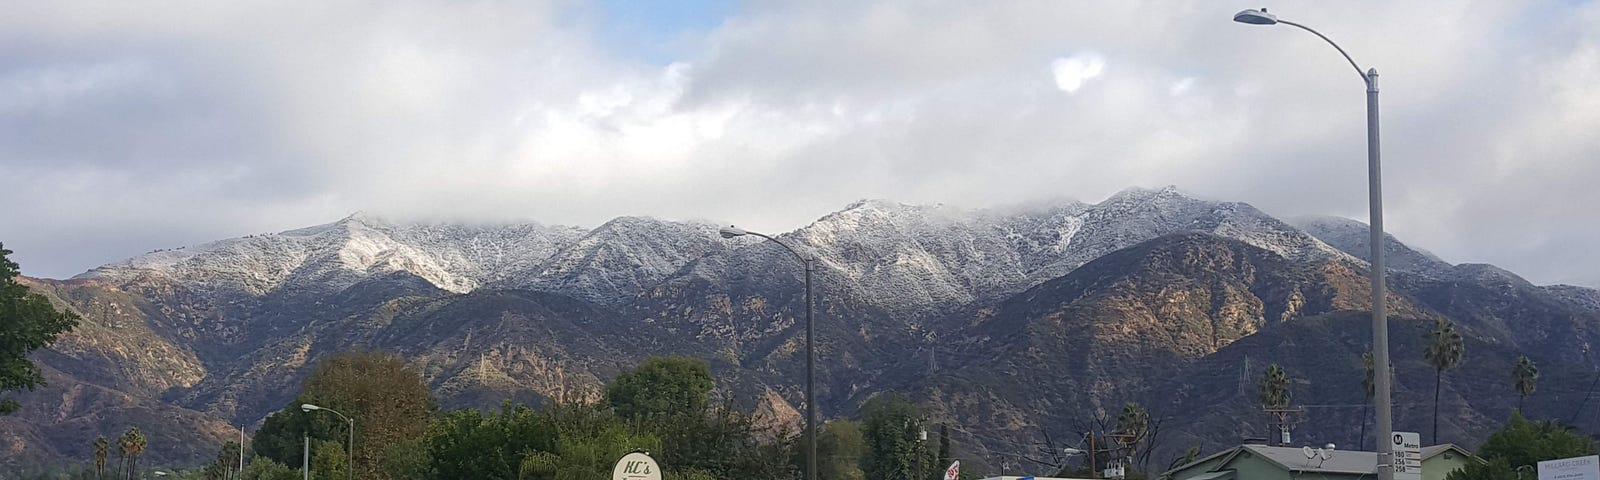 Mountains rising up behind gas station.